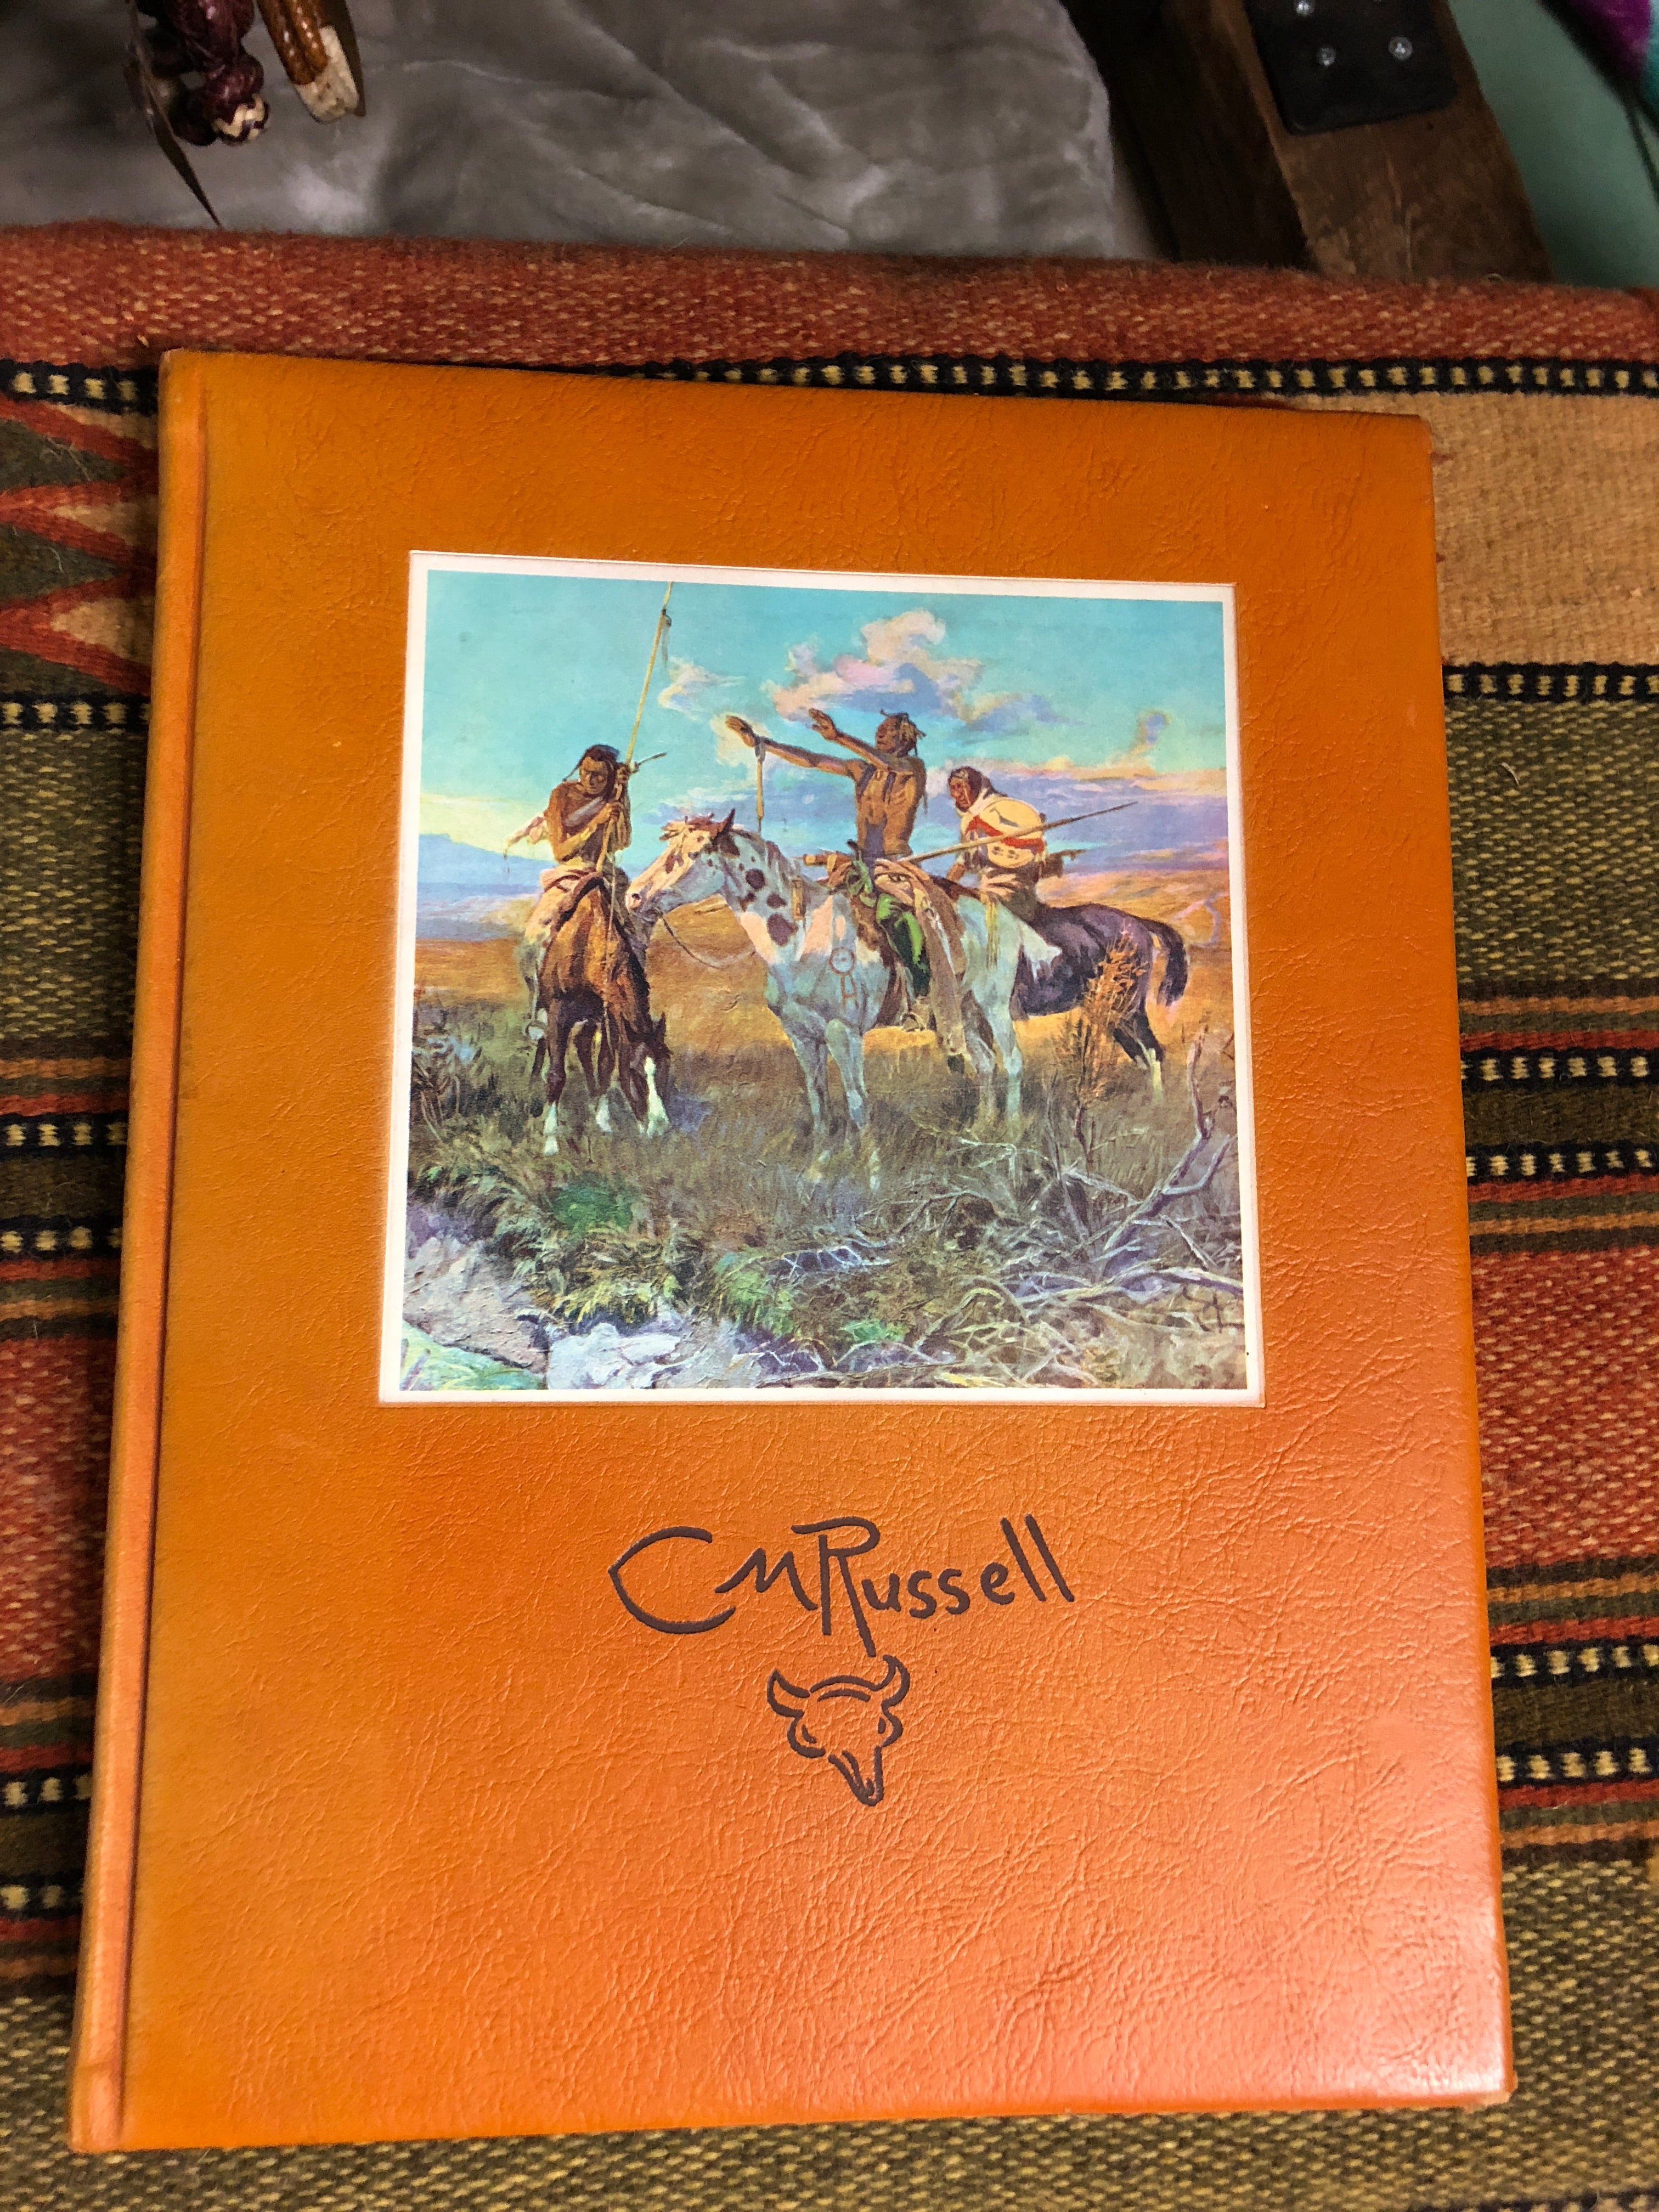 The Life and Work of the Cowboy by C.M. RUSSELL Limited Edition #S-441 of 2000